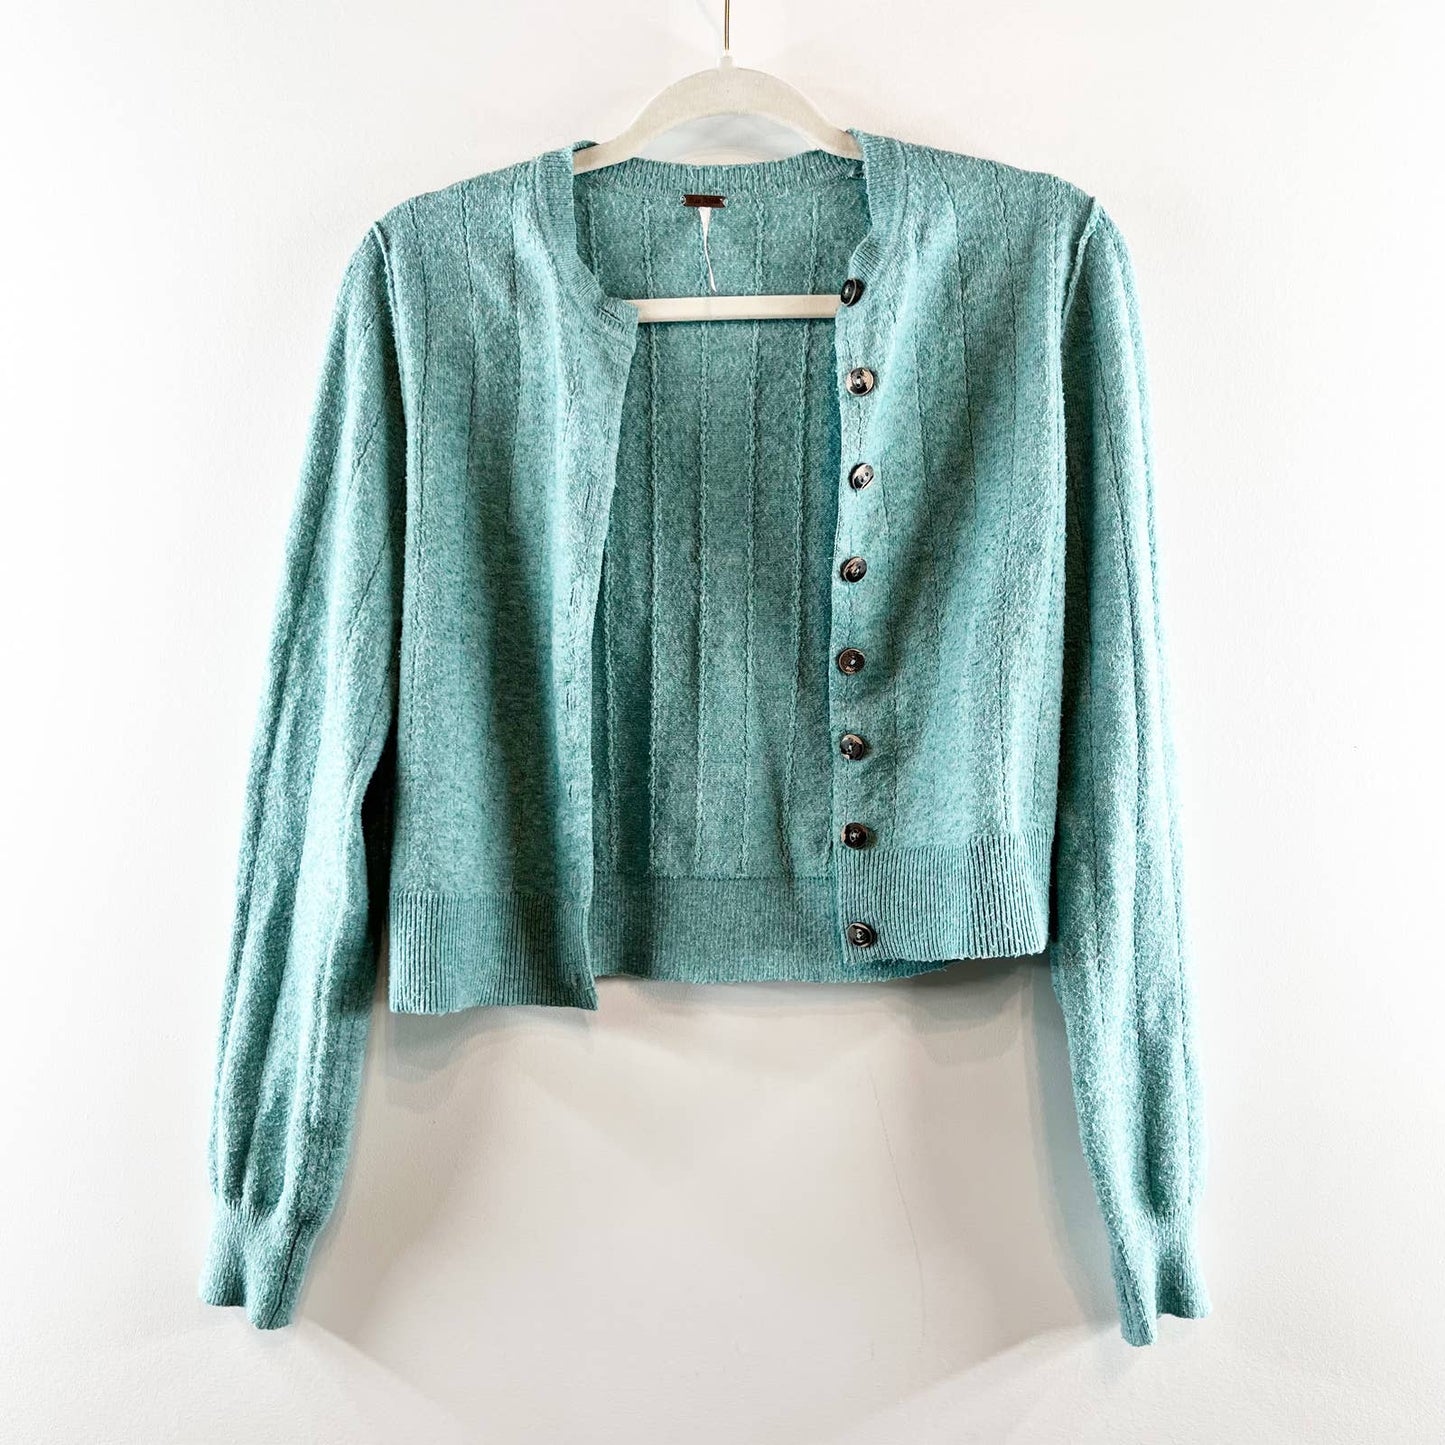 Free People Always With Me Cropped Cardigan Sweater Blue Green Small